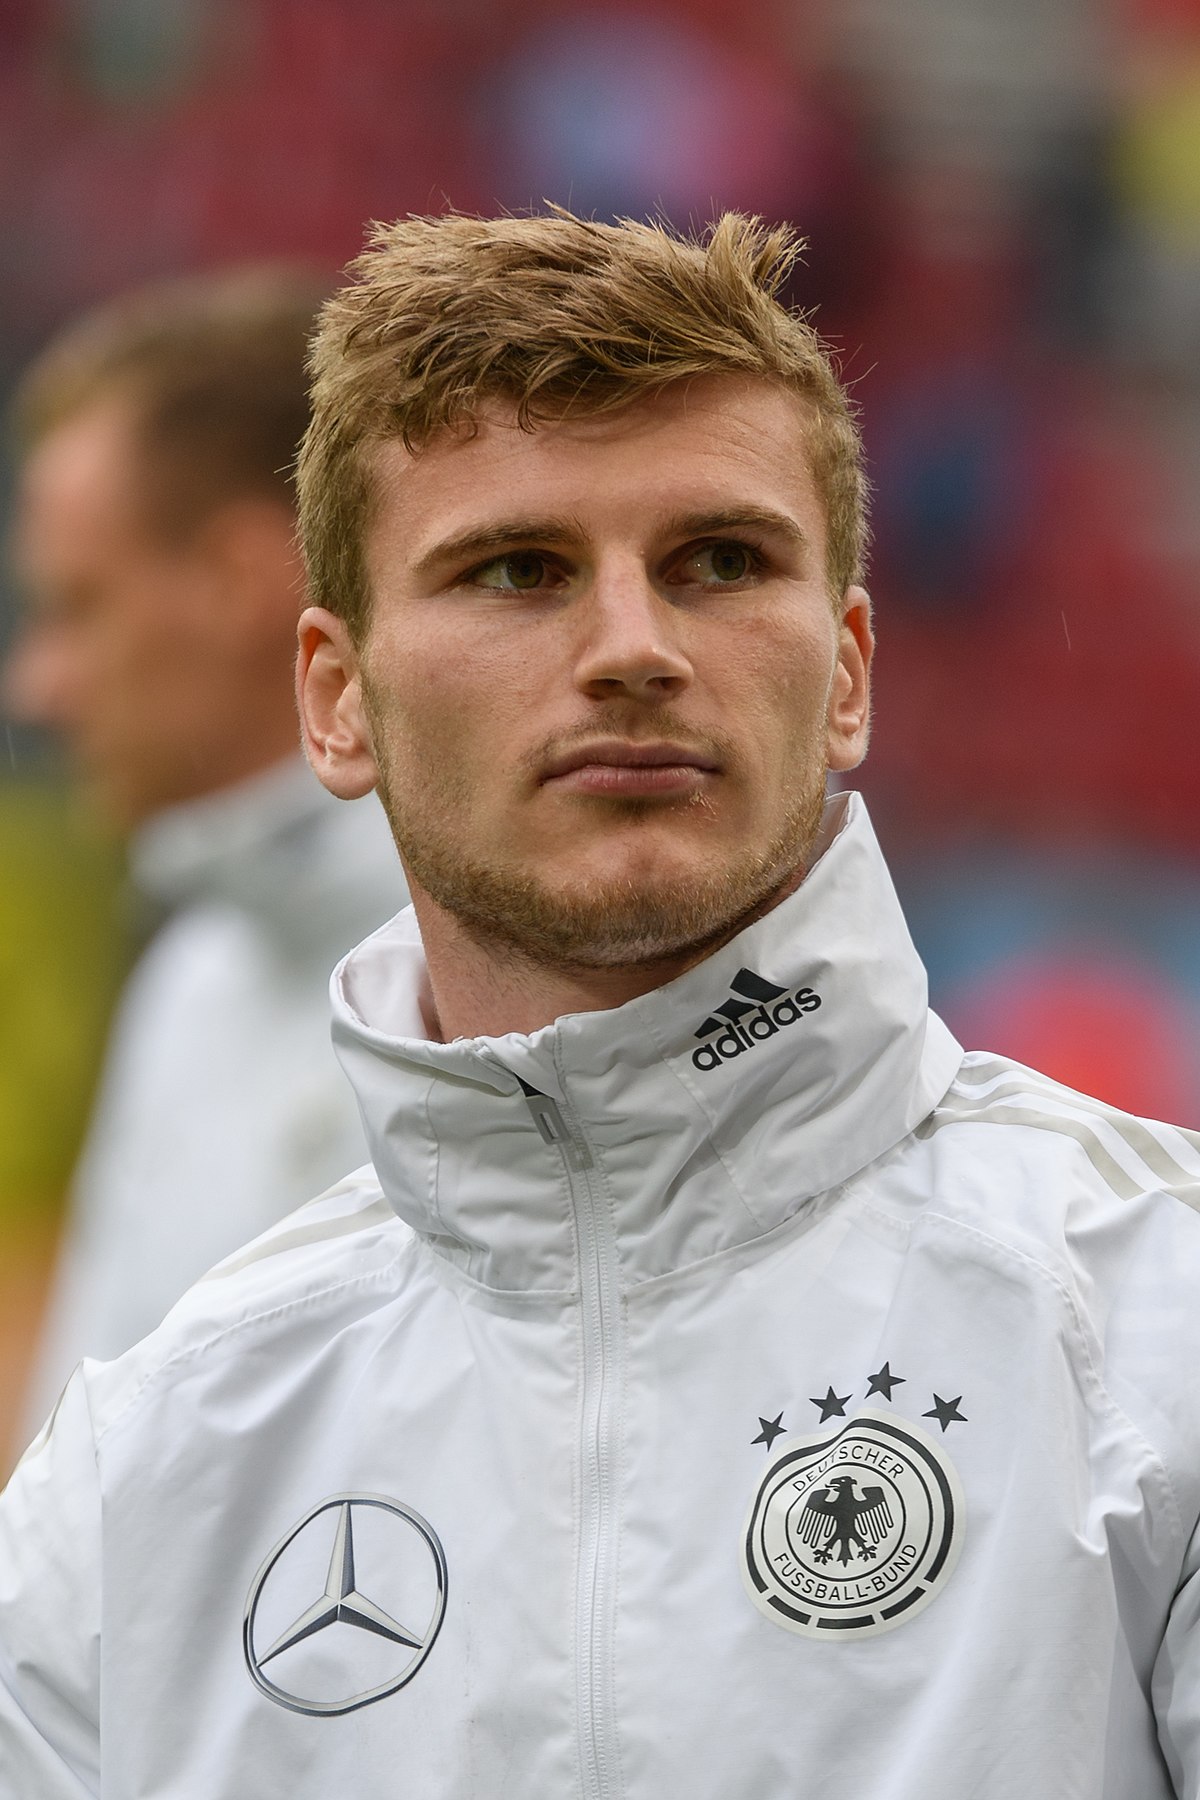 Timo Werner Tore